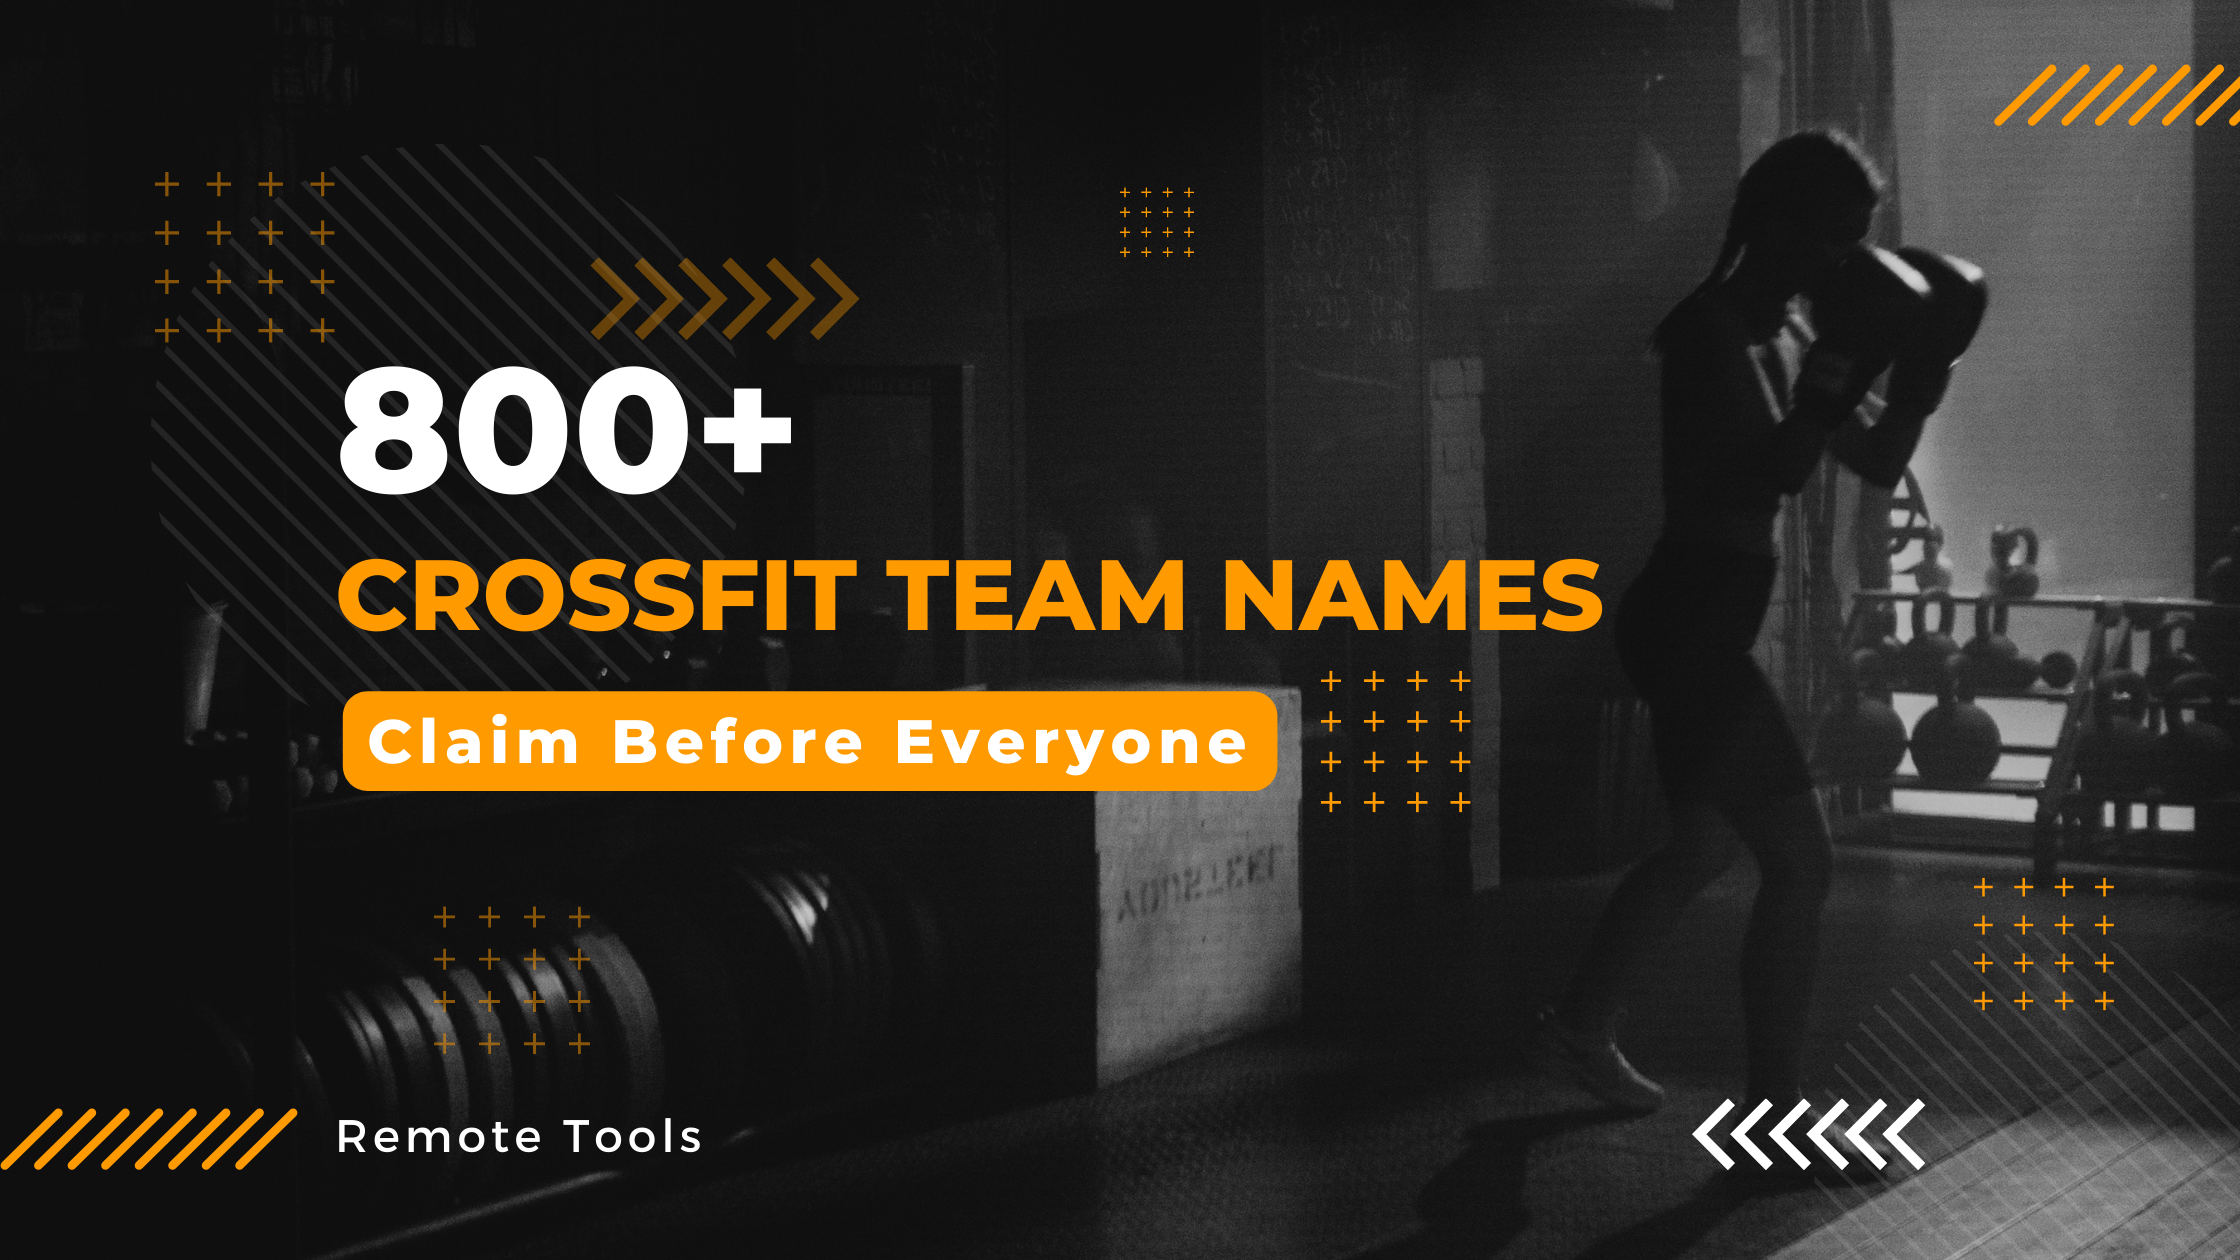 Remote.tools shares a list of 800+ Crossfit team names